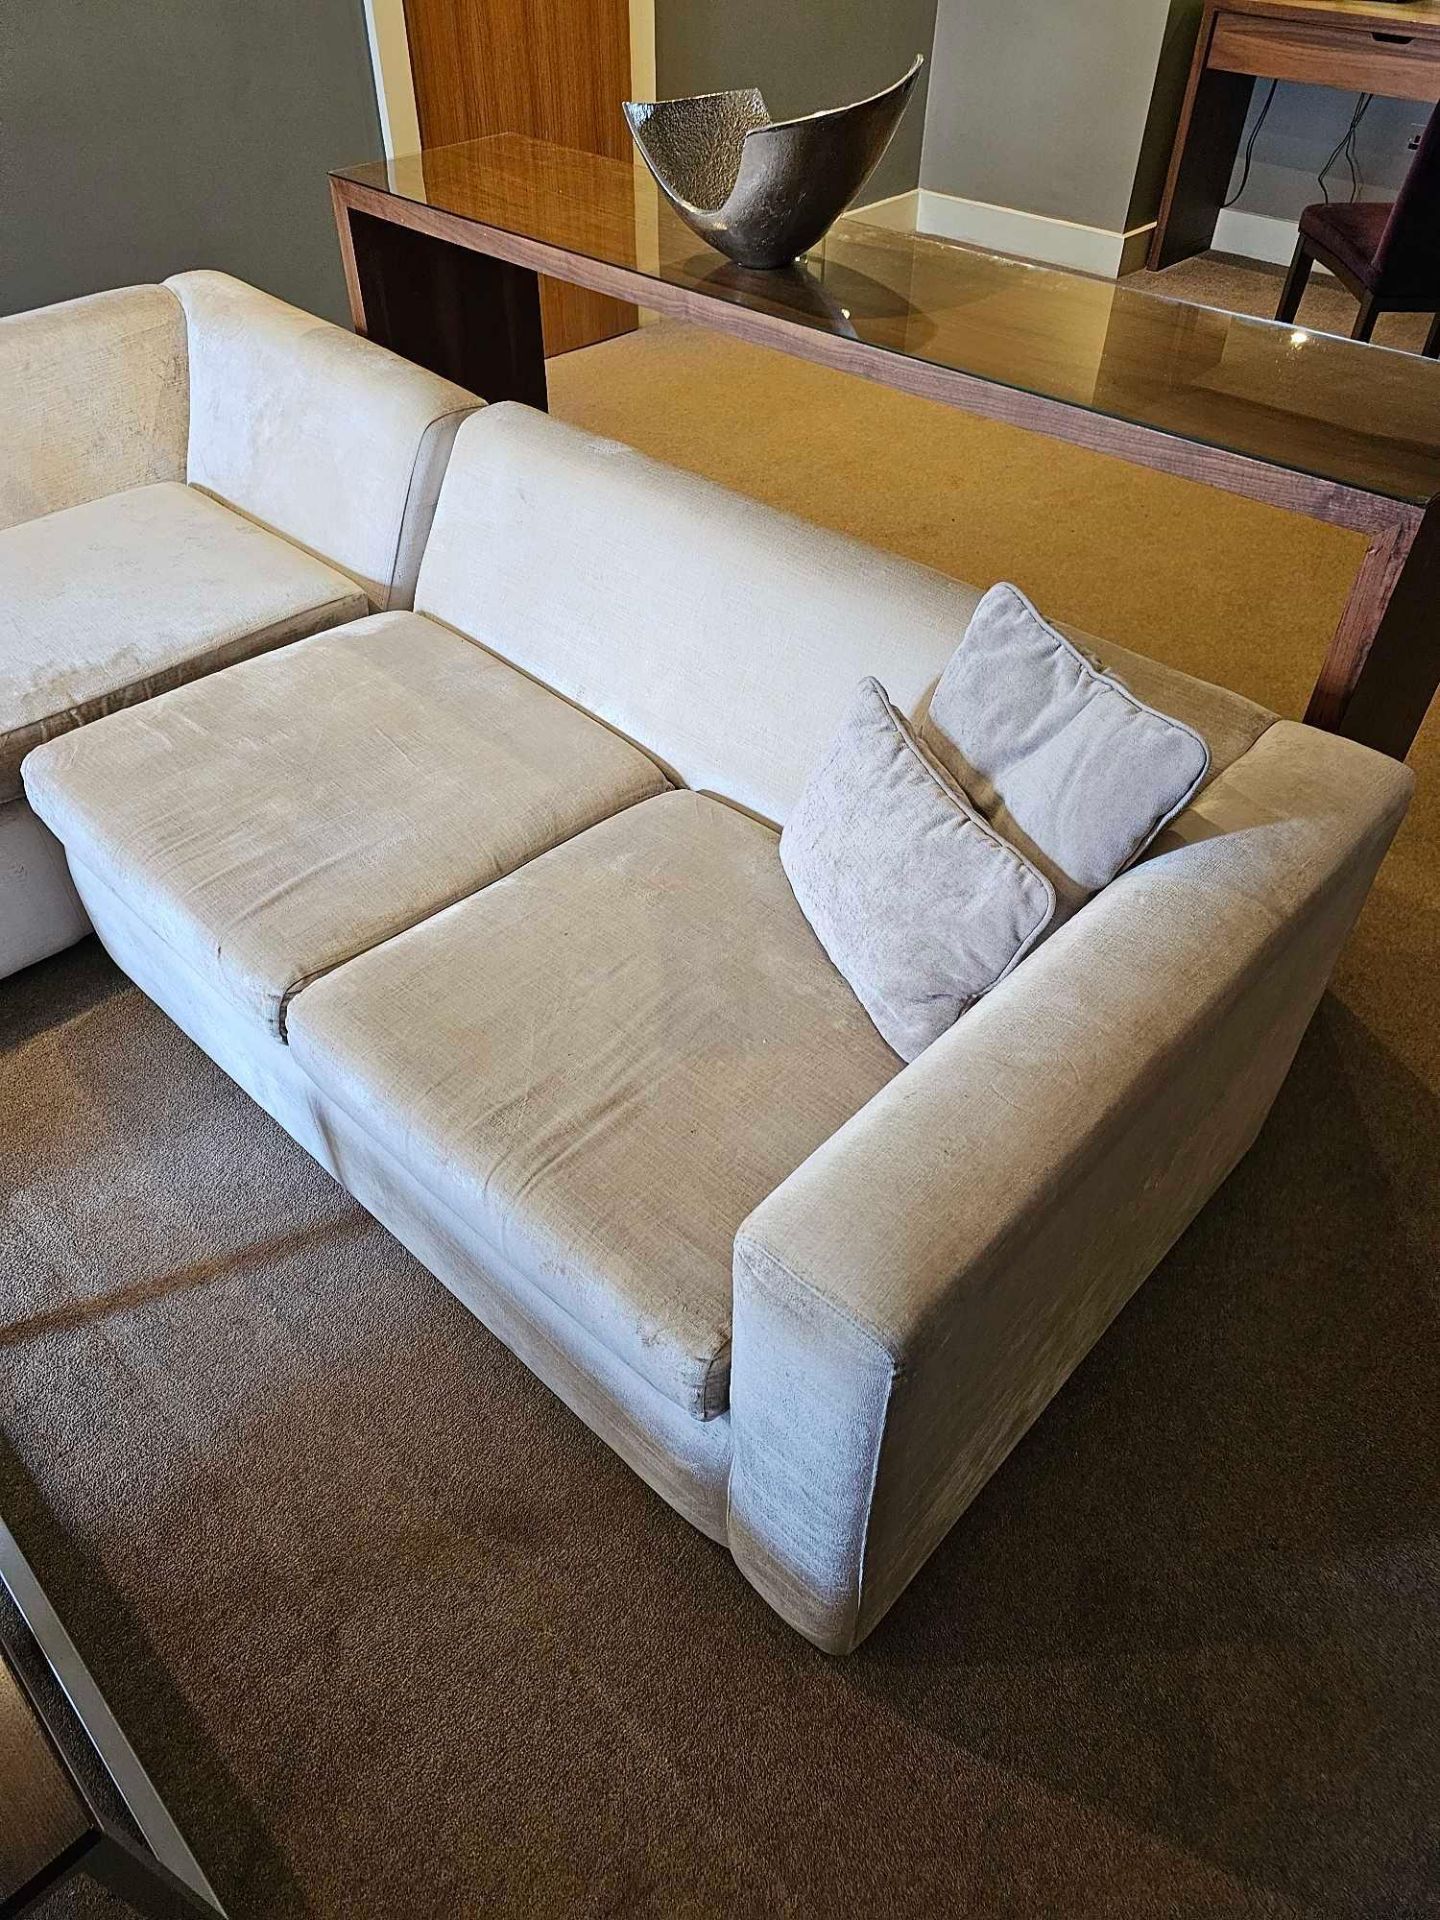 An upholstered contract hospitality sofa / sofa bed 240 /160 x 90 x 65cm ( Location : ) - Image 3 of 3